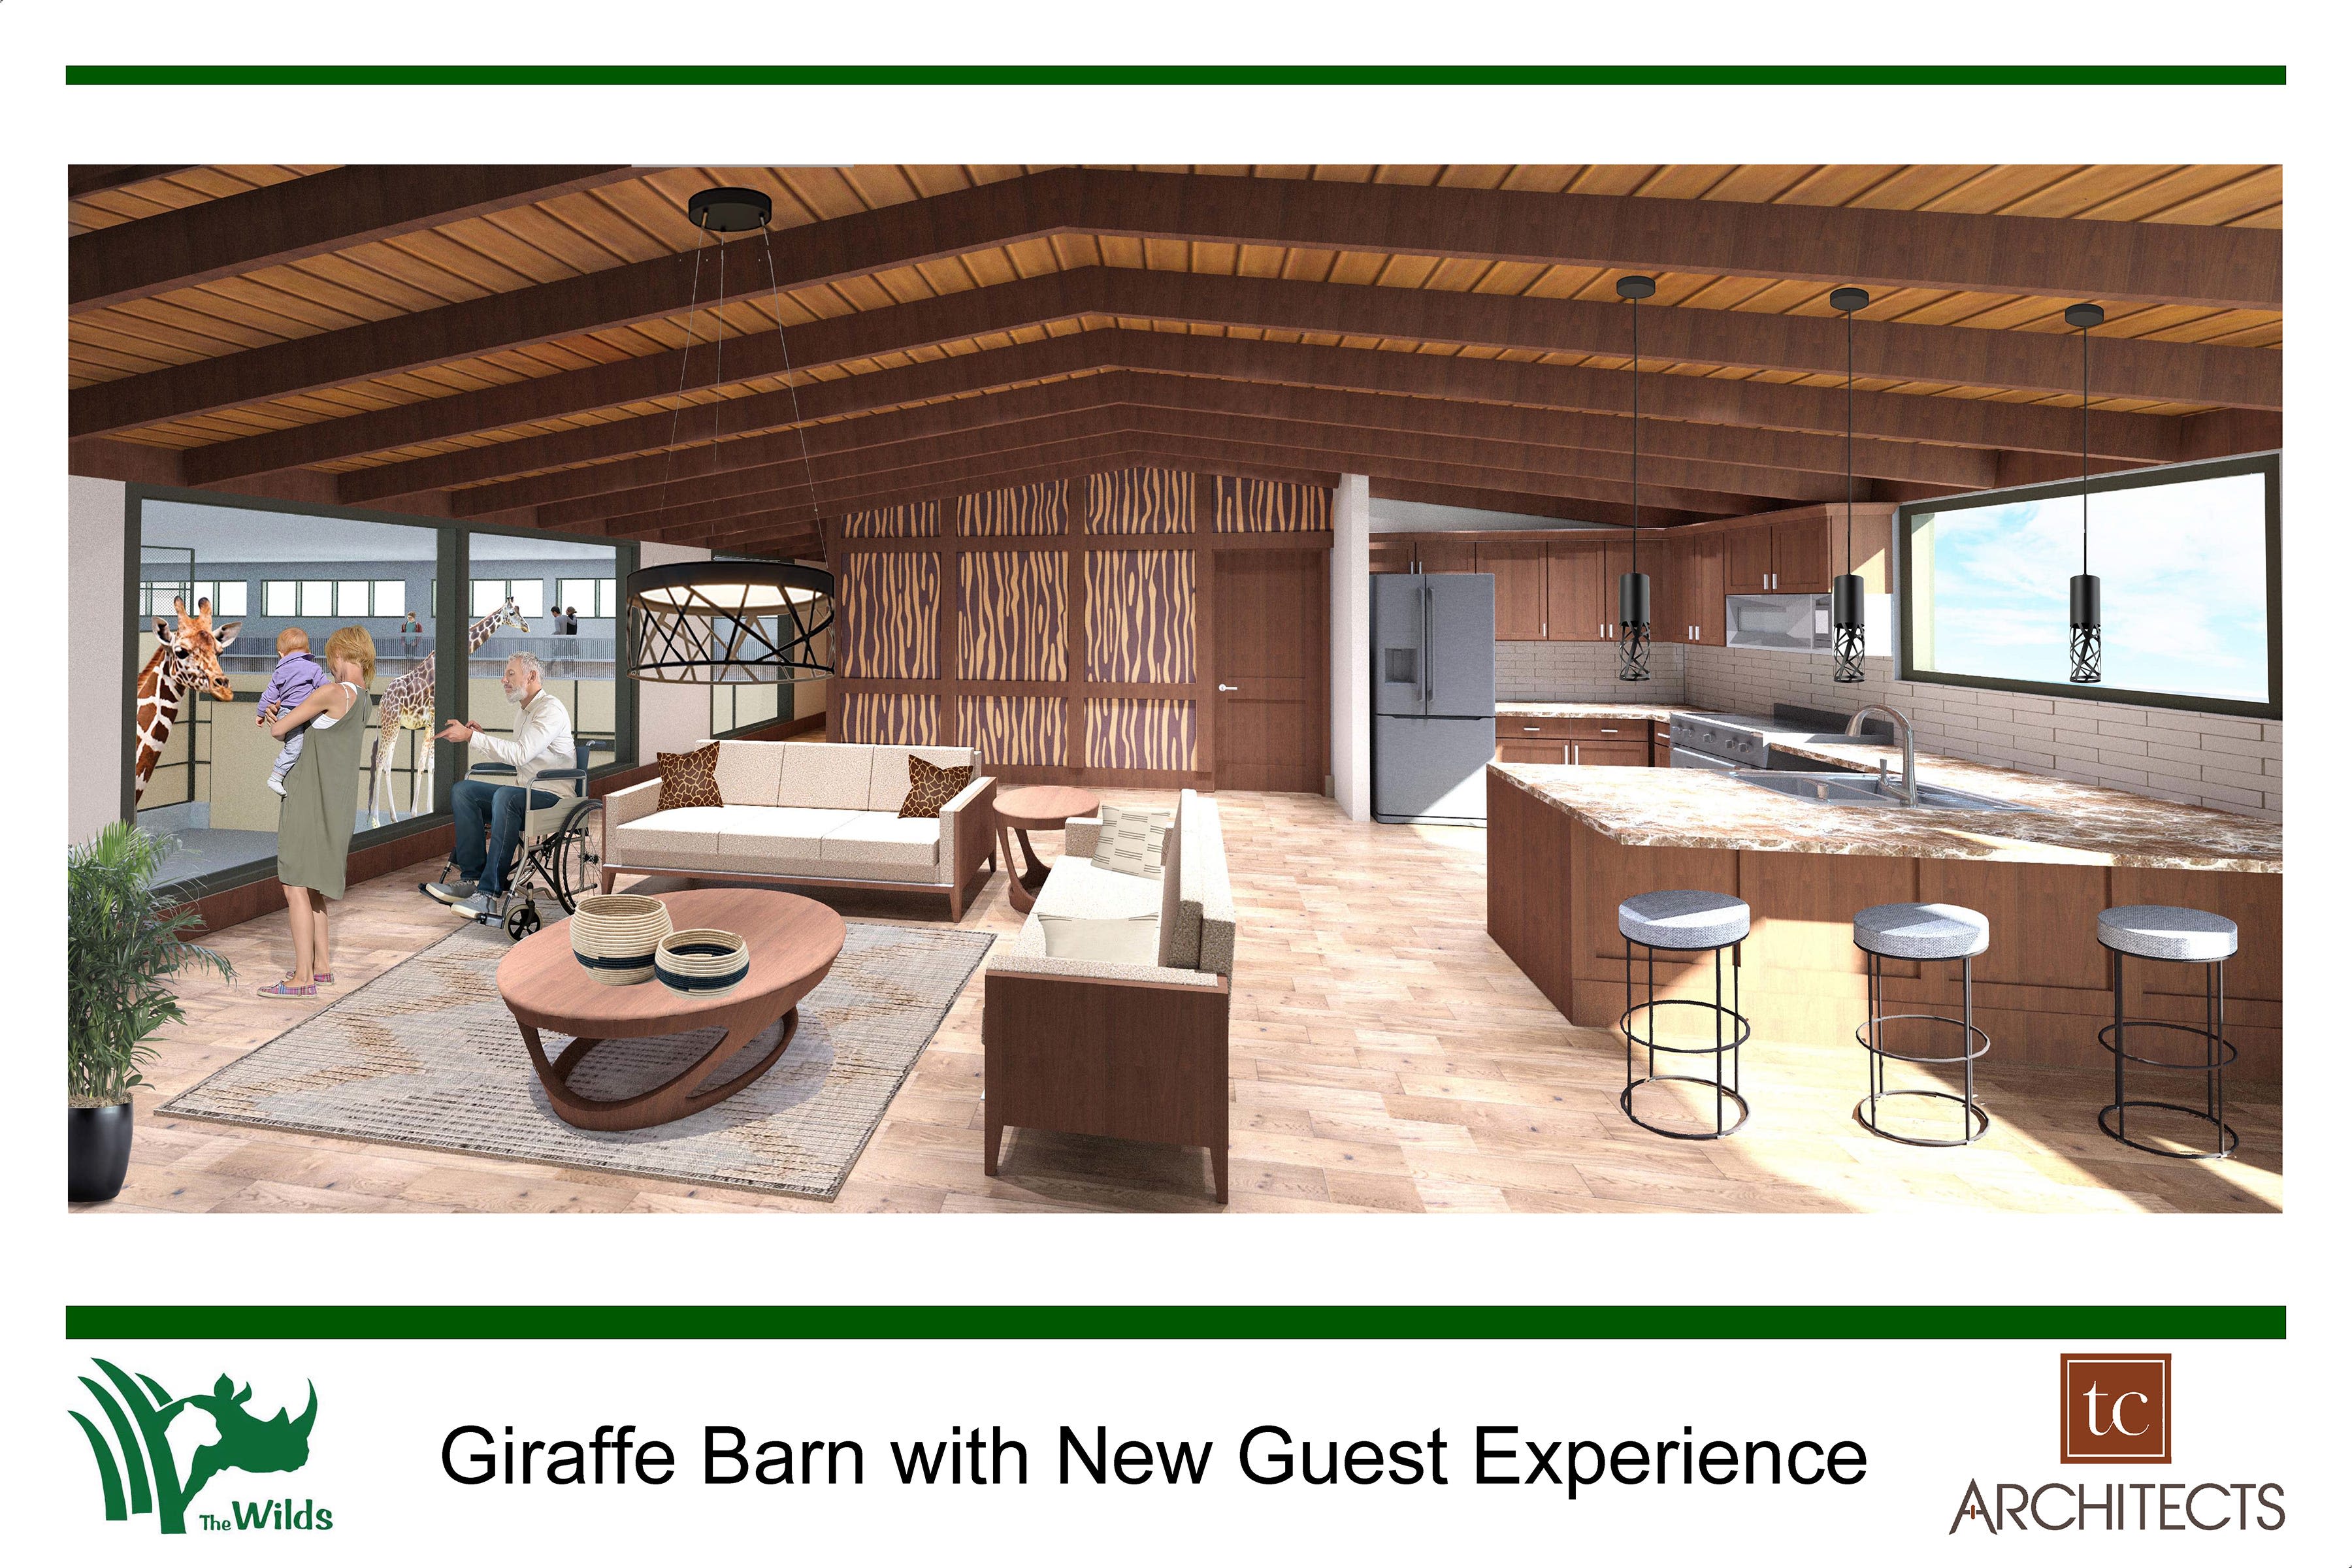 The Wilds: $2.5M grant will help with innovative lodging and new giraffe barn